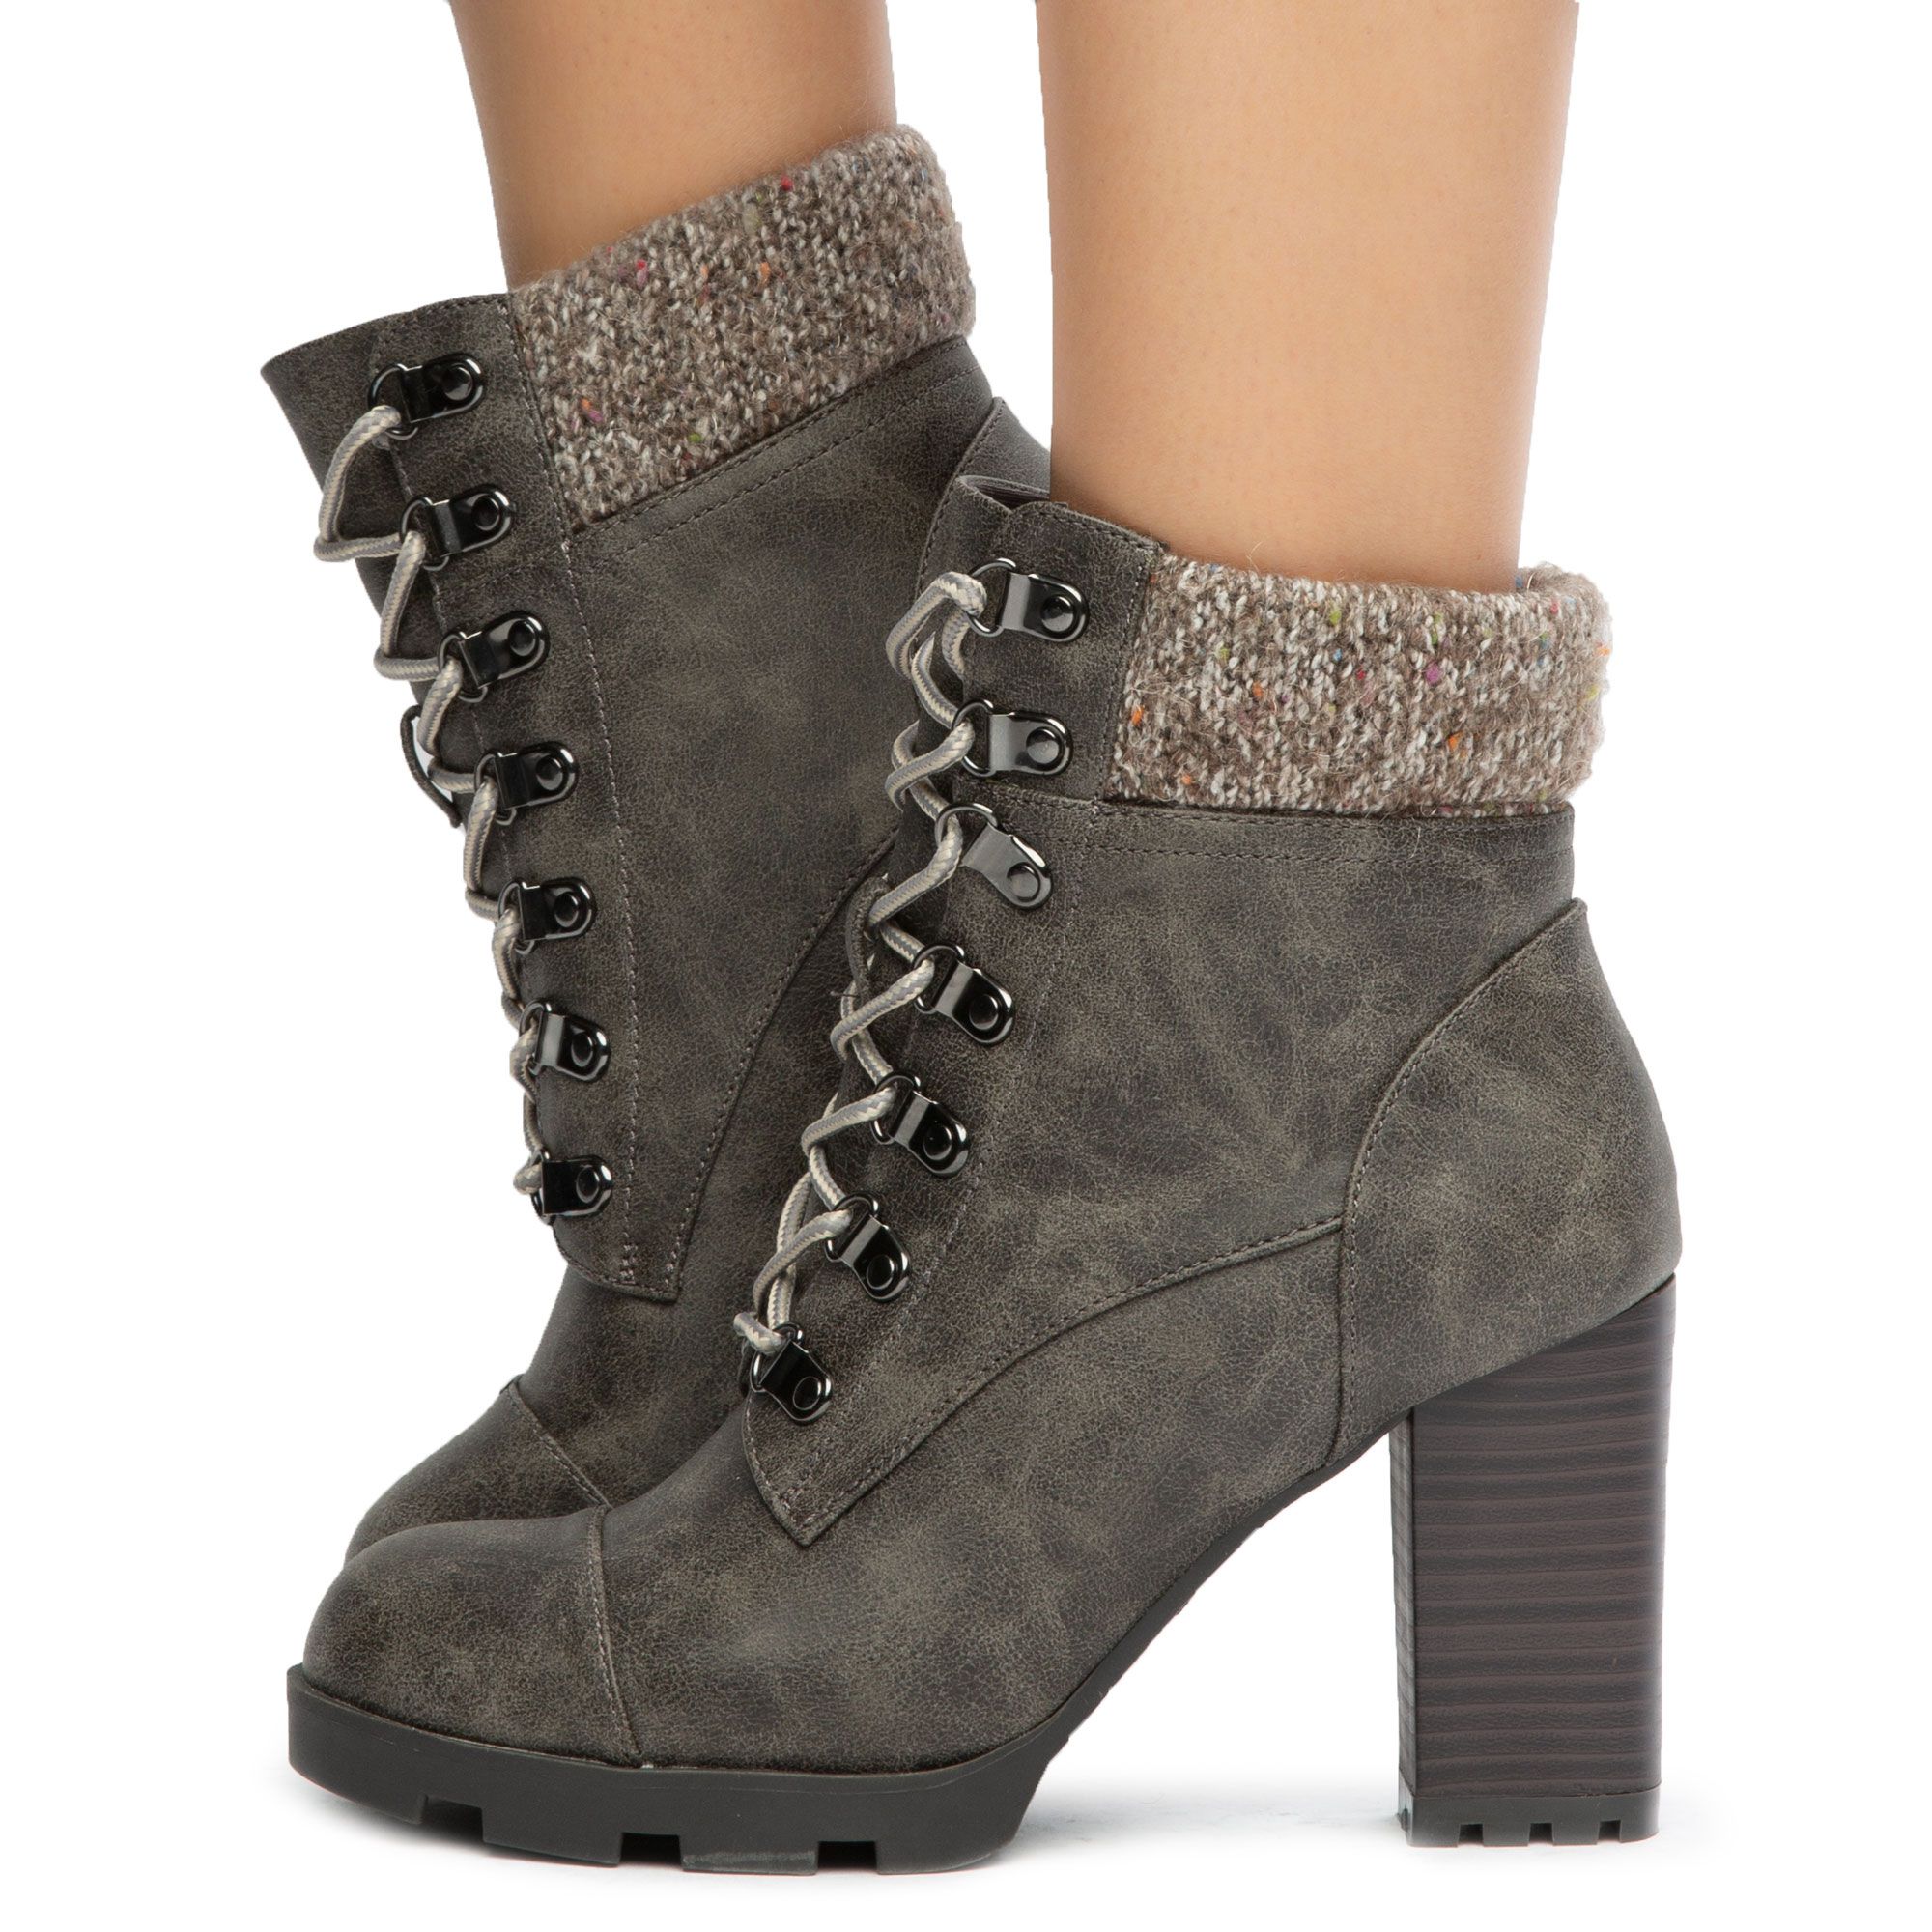 Pilate-11 Lace-Up Booties